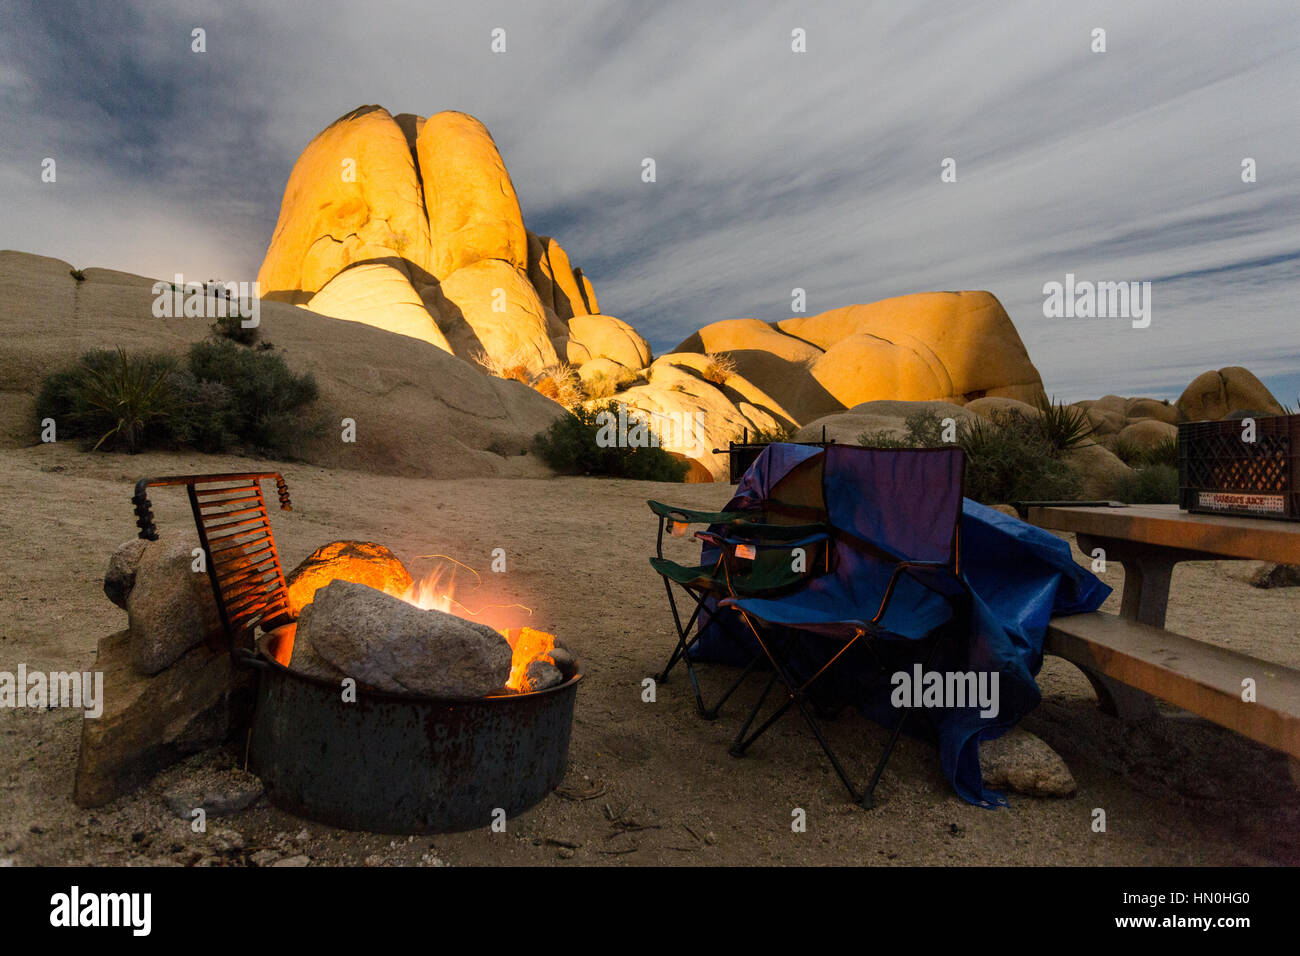 A campfire roars in the moonlight at a site in Jumbo Rocks campground at Joshua Tree National Park. Stock Photo